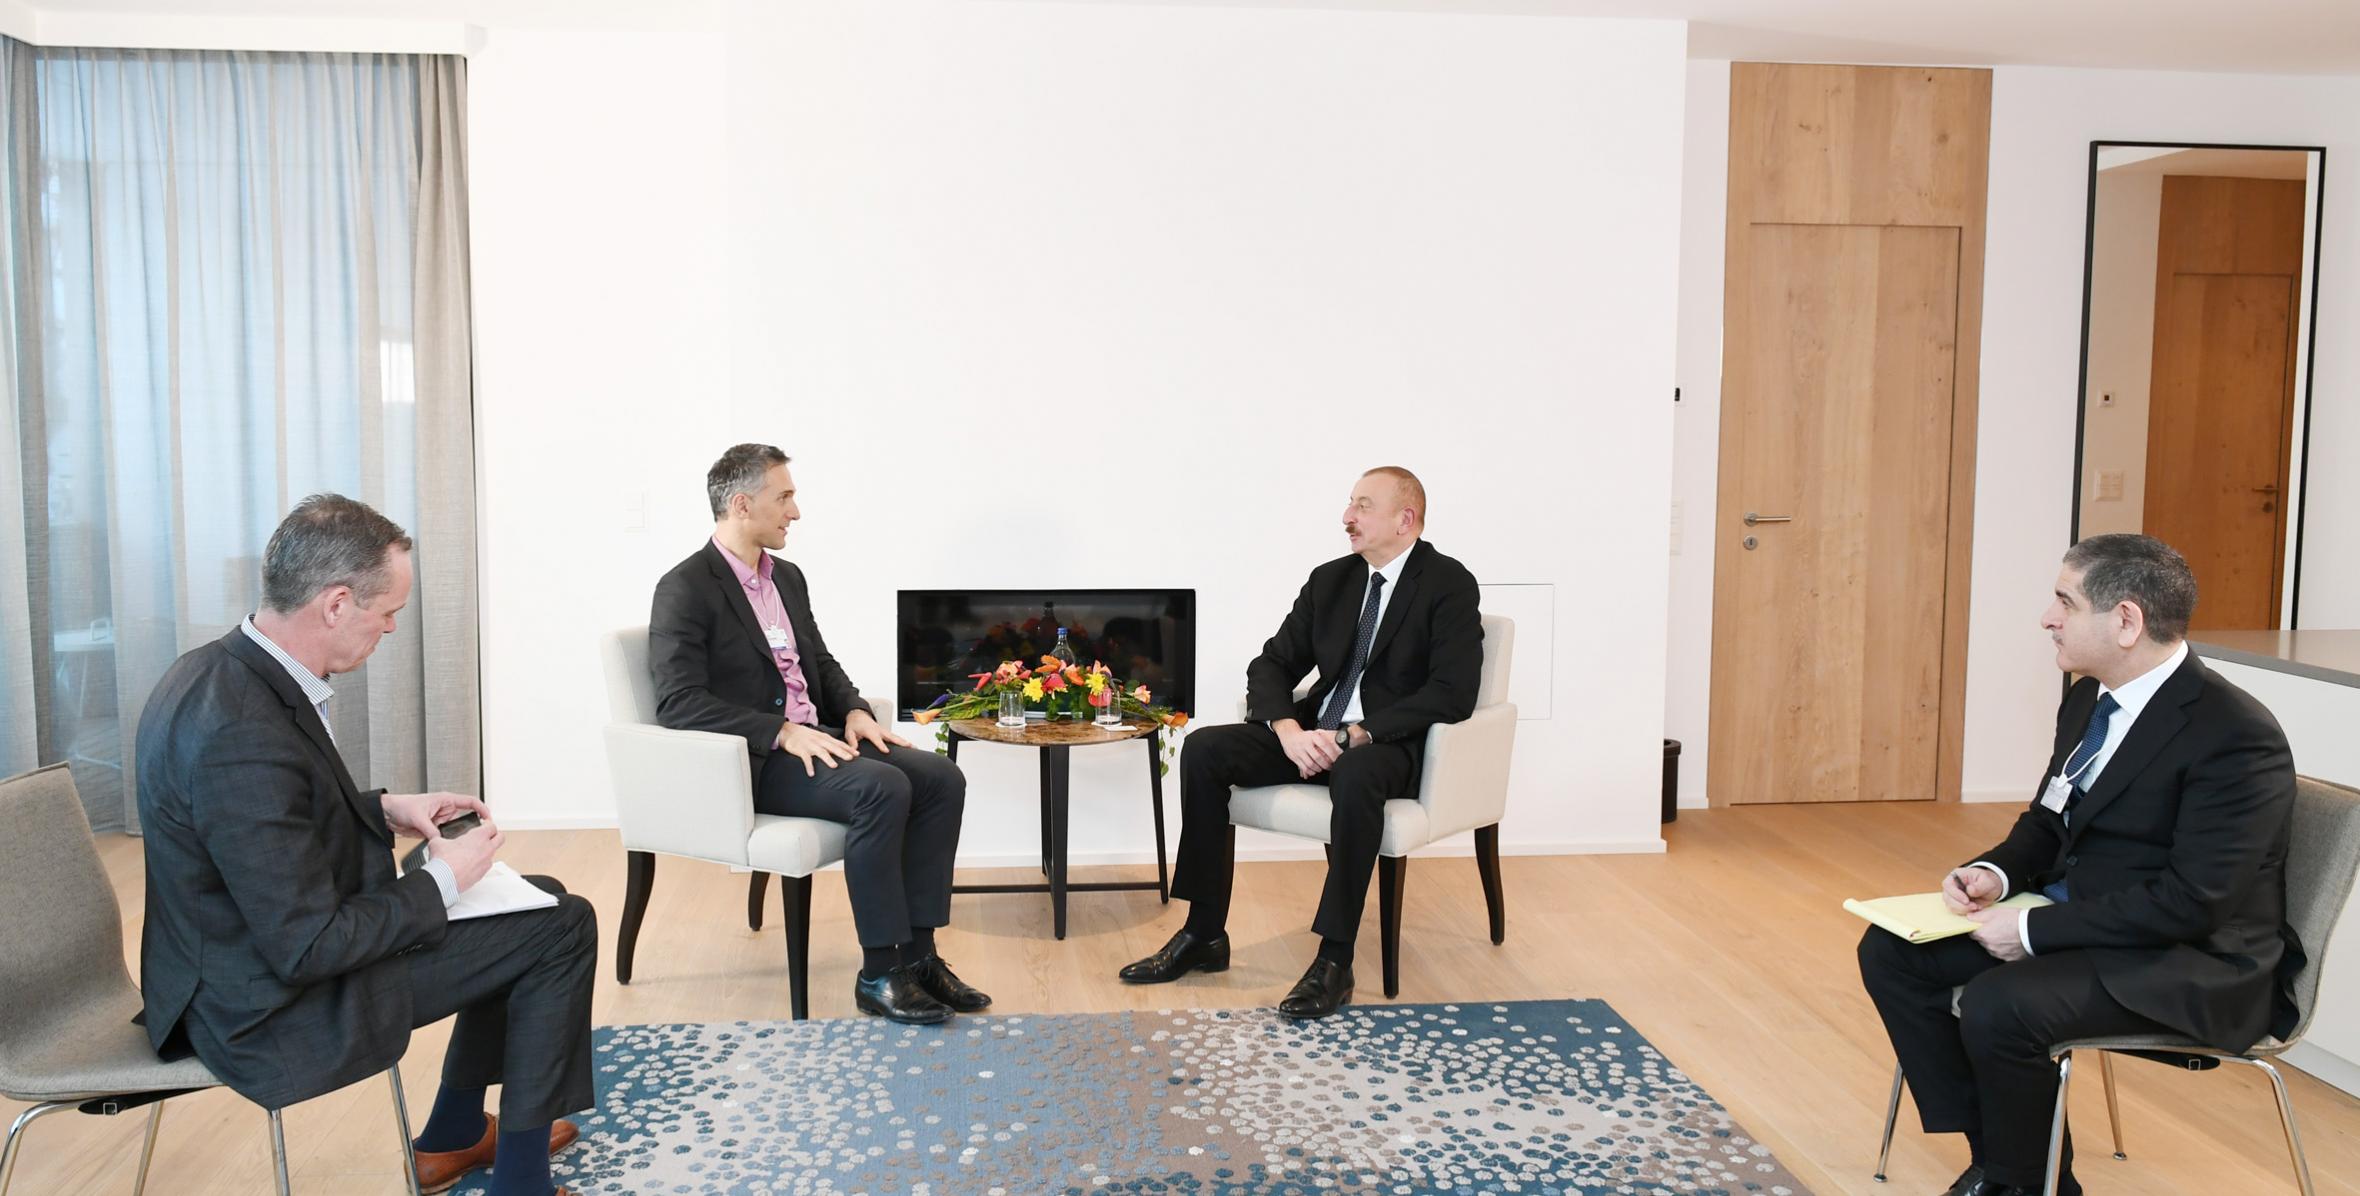 Ilham Aliyev met with Chief Executive Officer of Signify